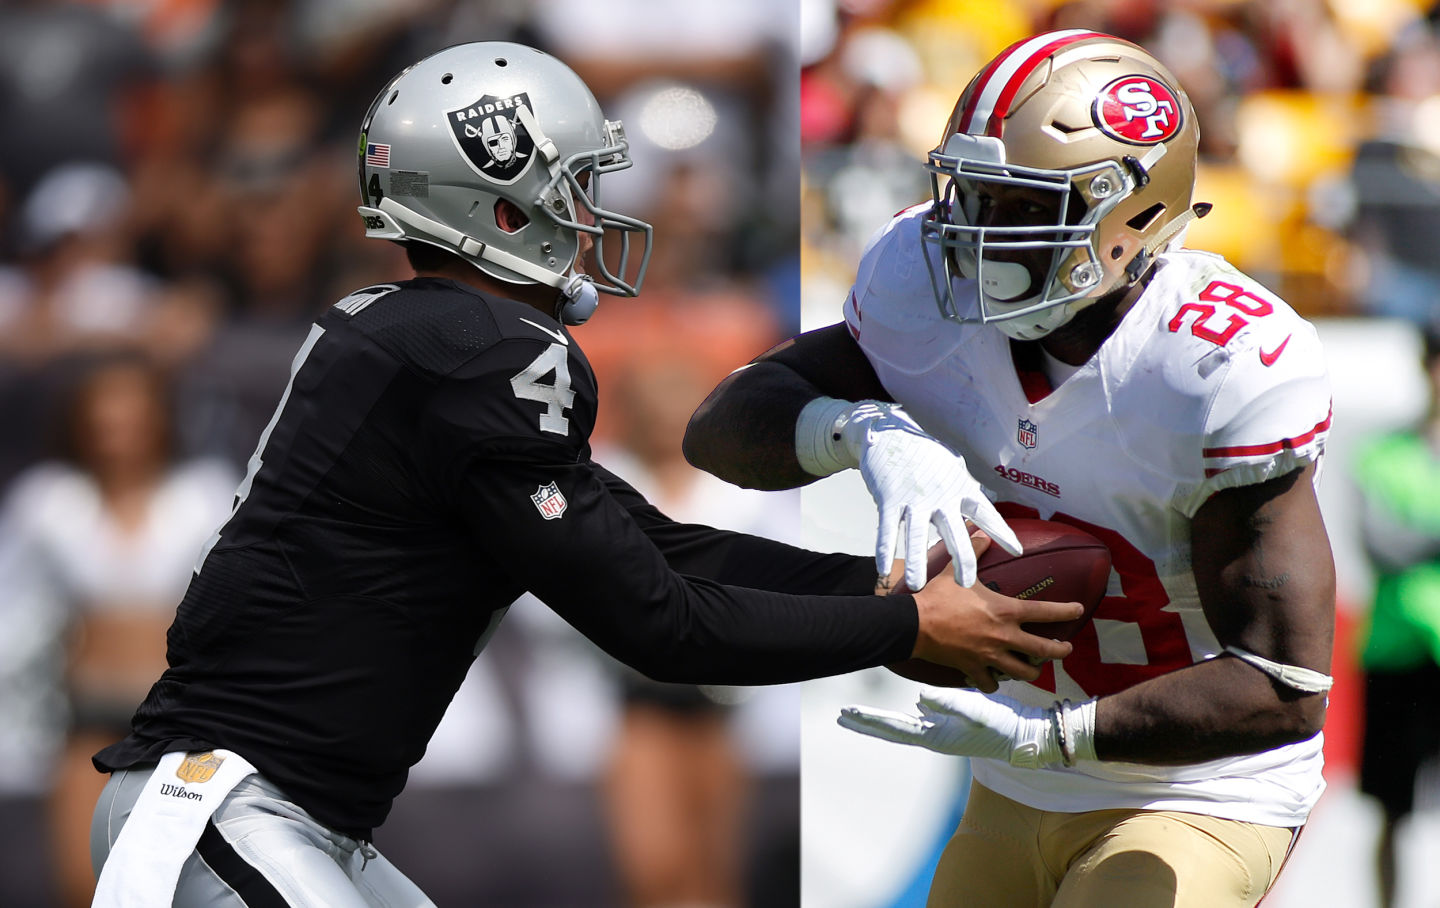 The 49ers struggled through a rough year while the Raiders look to be on the way back. (Getty Images, composite by Adam Grossberg)